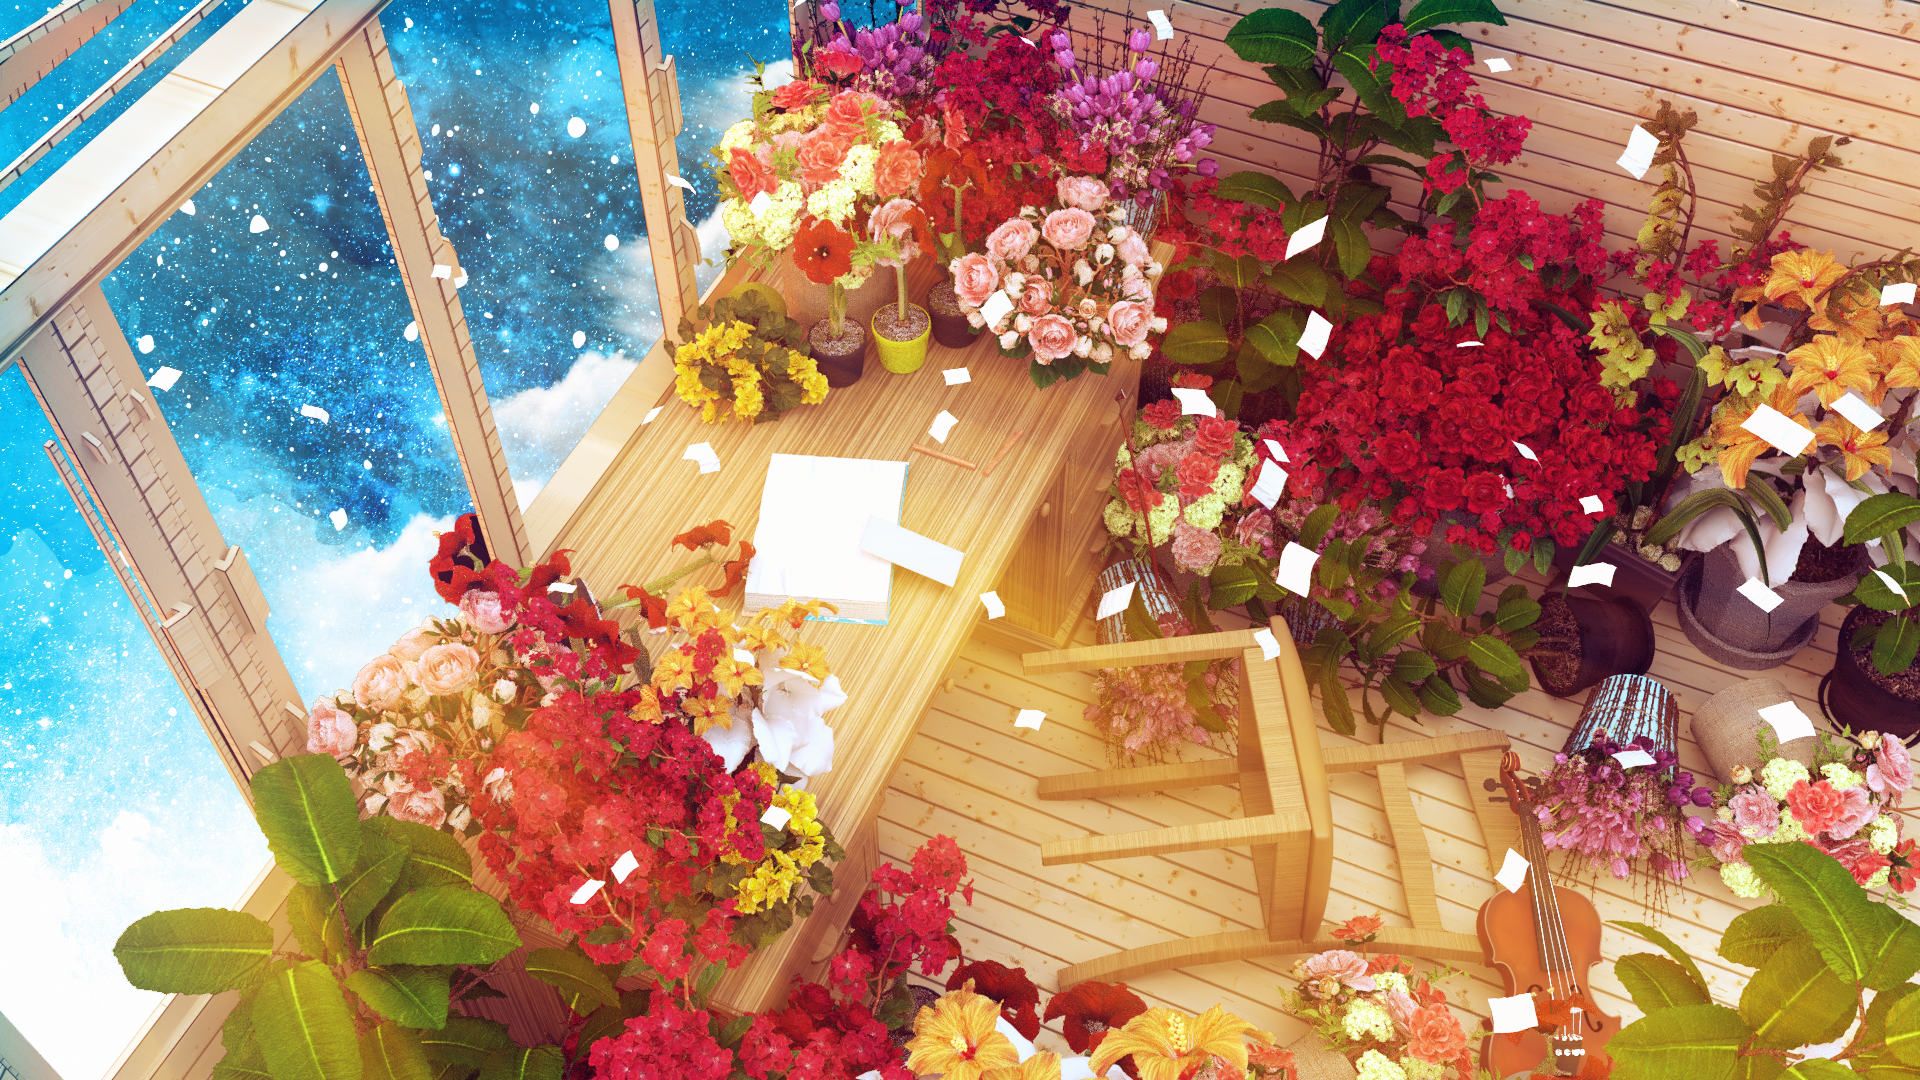 Relaxing Anime Piano Music - Spring Flowers - YouTube-demhanvico.com.vn